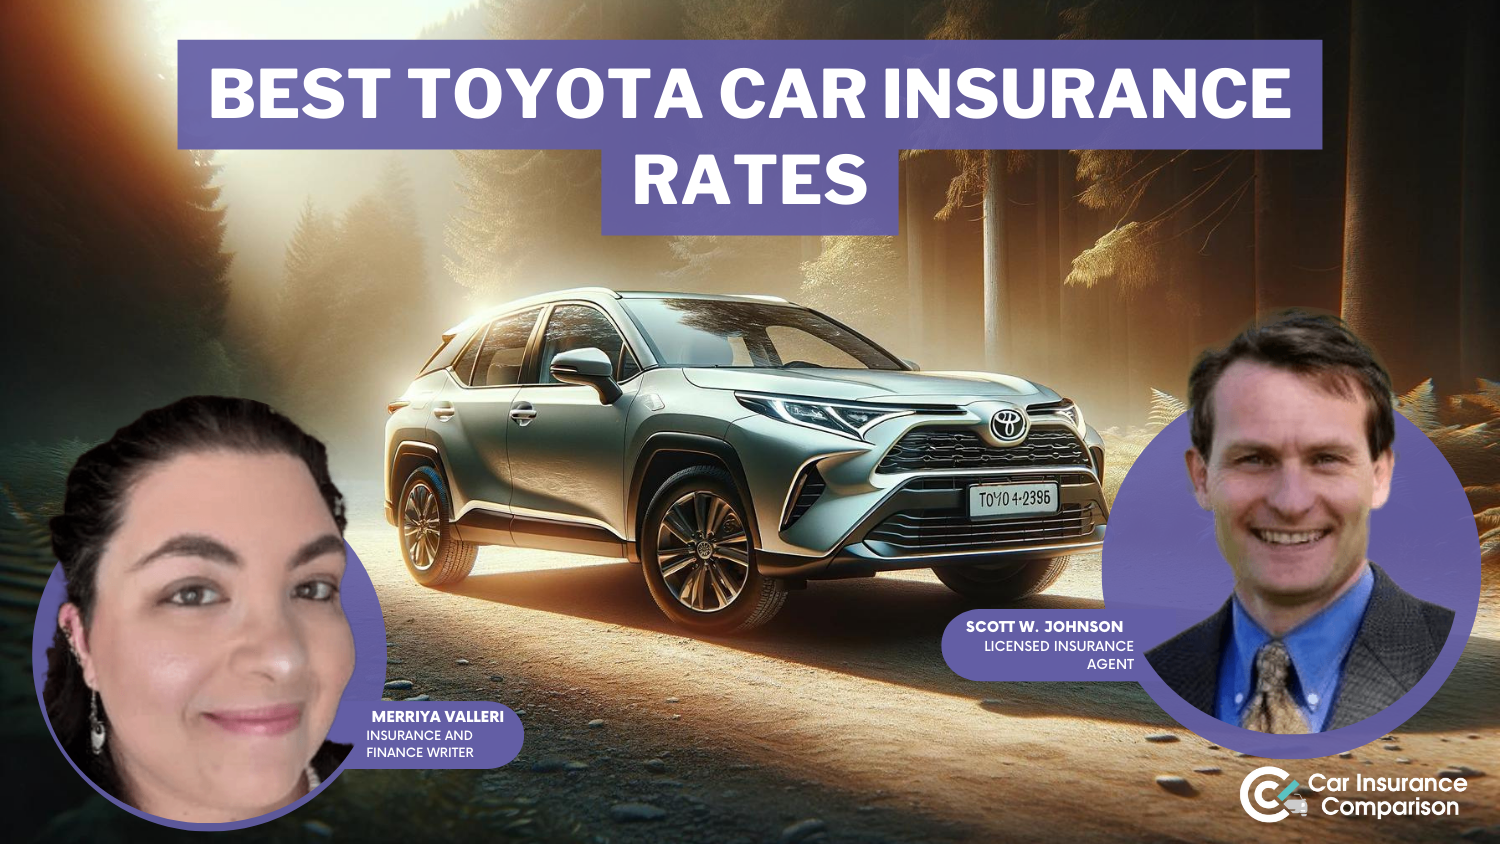 Best Toyota Car Insurance Rates: Geico, Allstate, Liberty Mutual